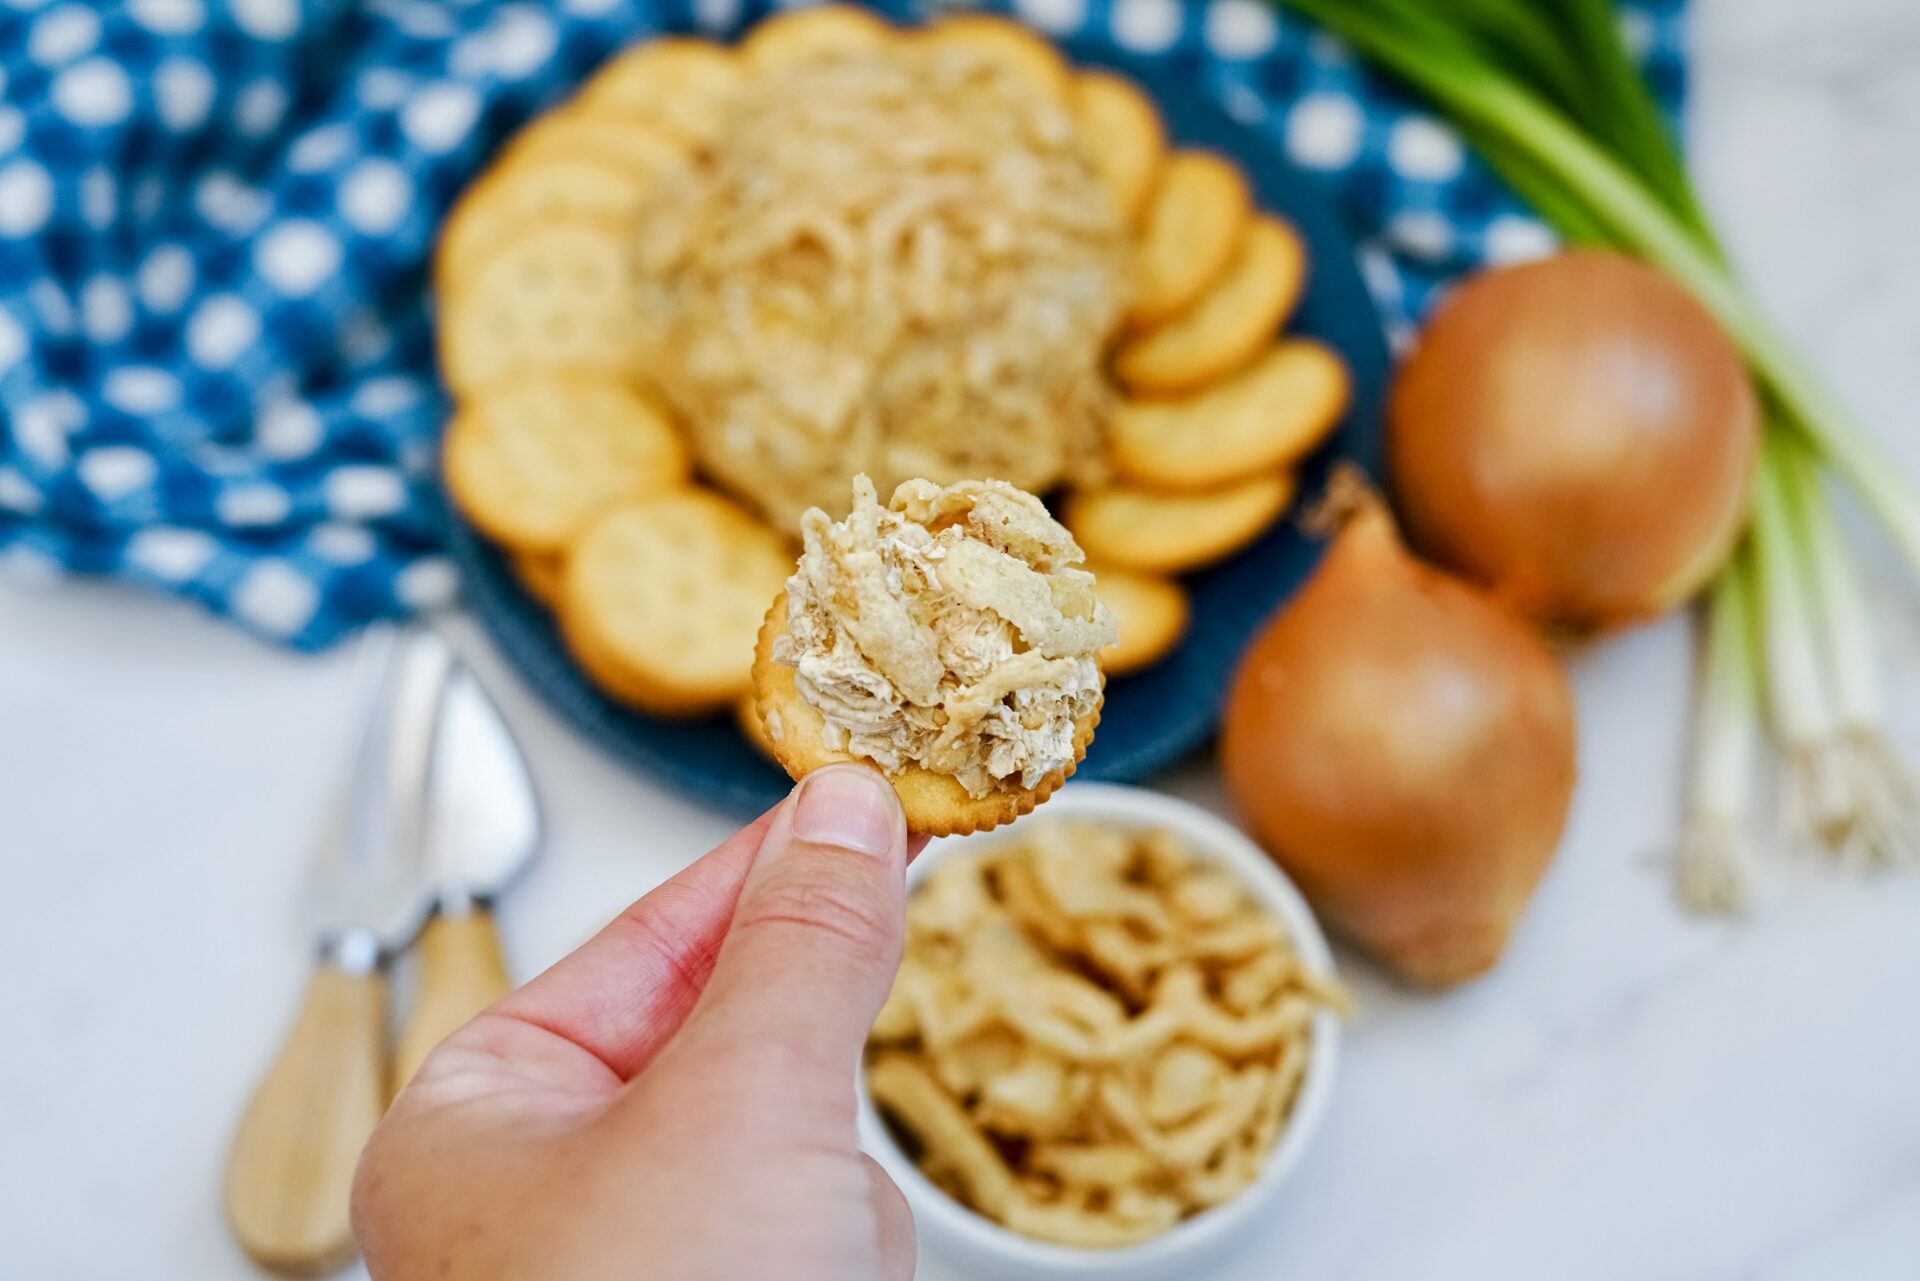 Taking a scoop of french onion cheese ball with a cracker.